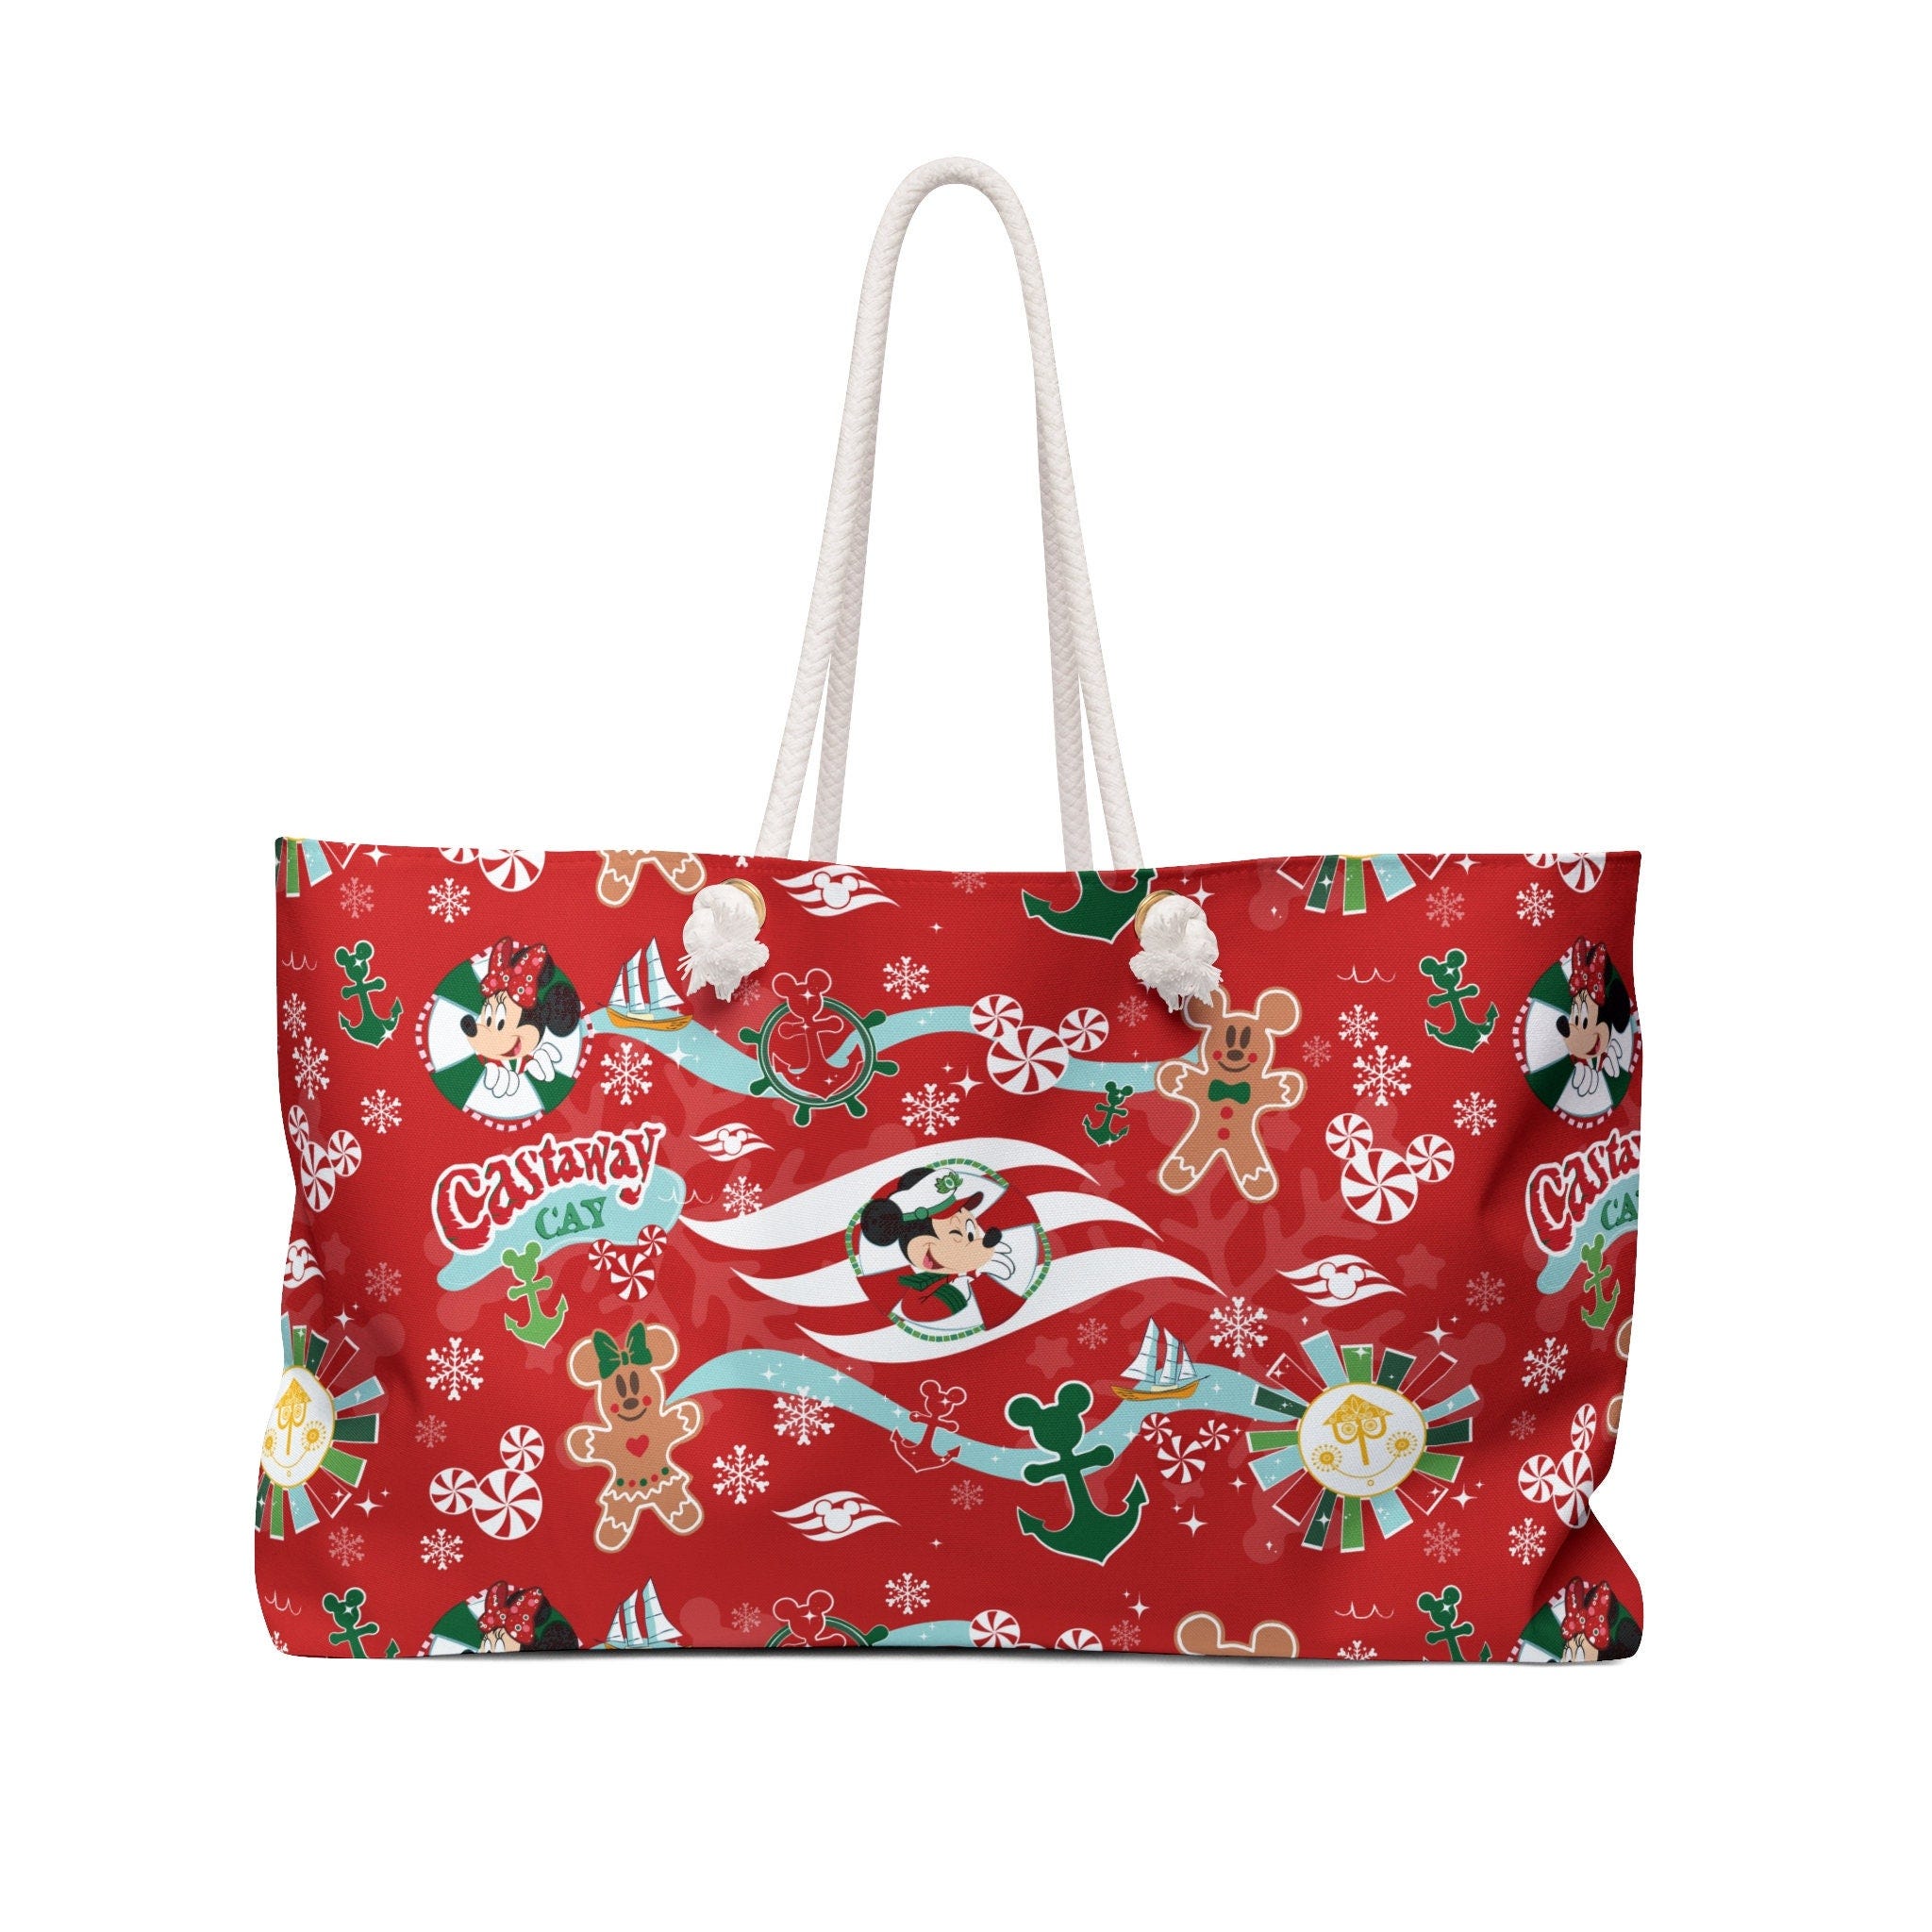 DCL Cruise Weekender Bag - Captain Mickey and Minnie Very Merrytime Cruise Christmas Design